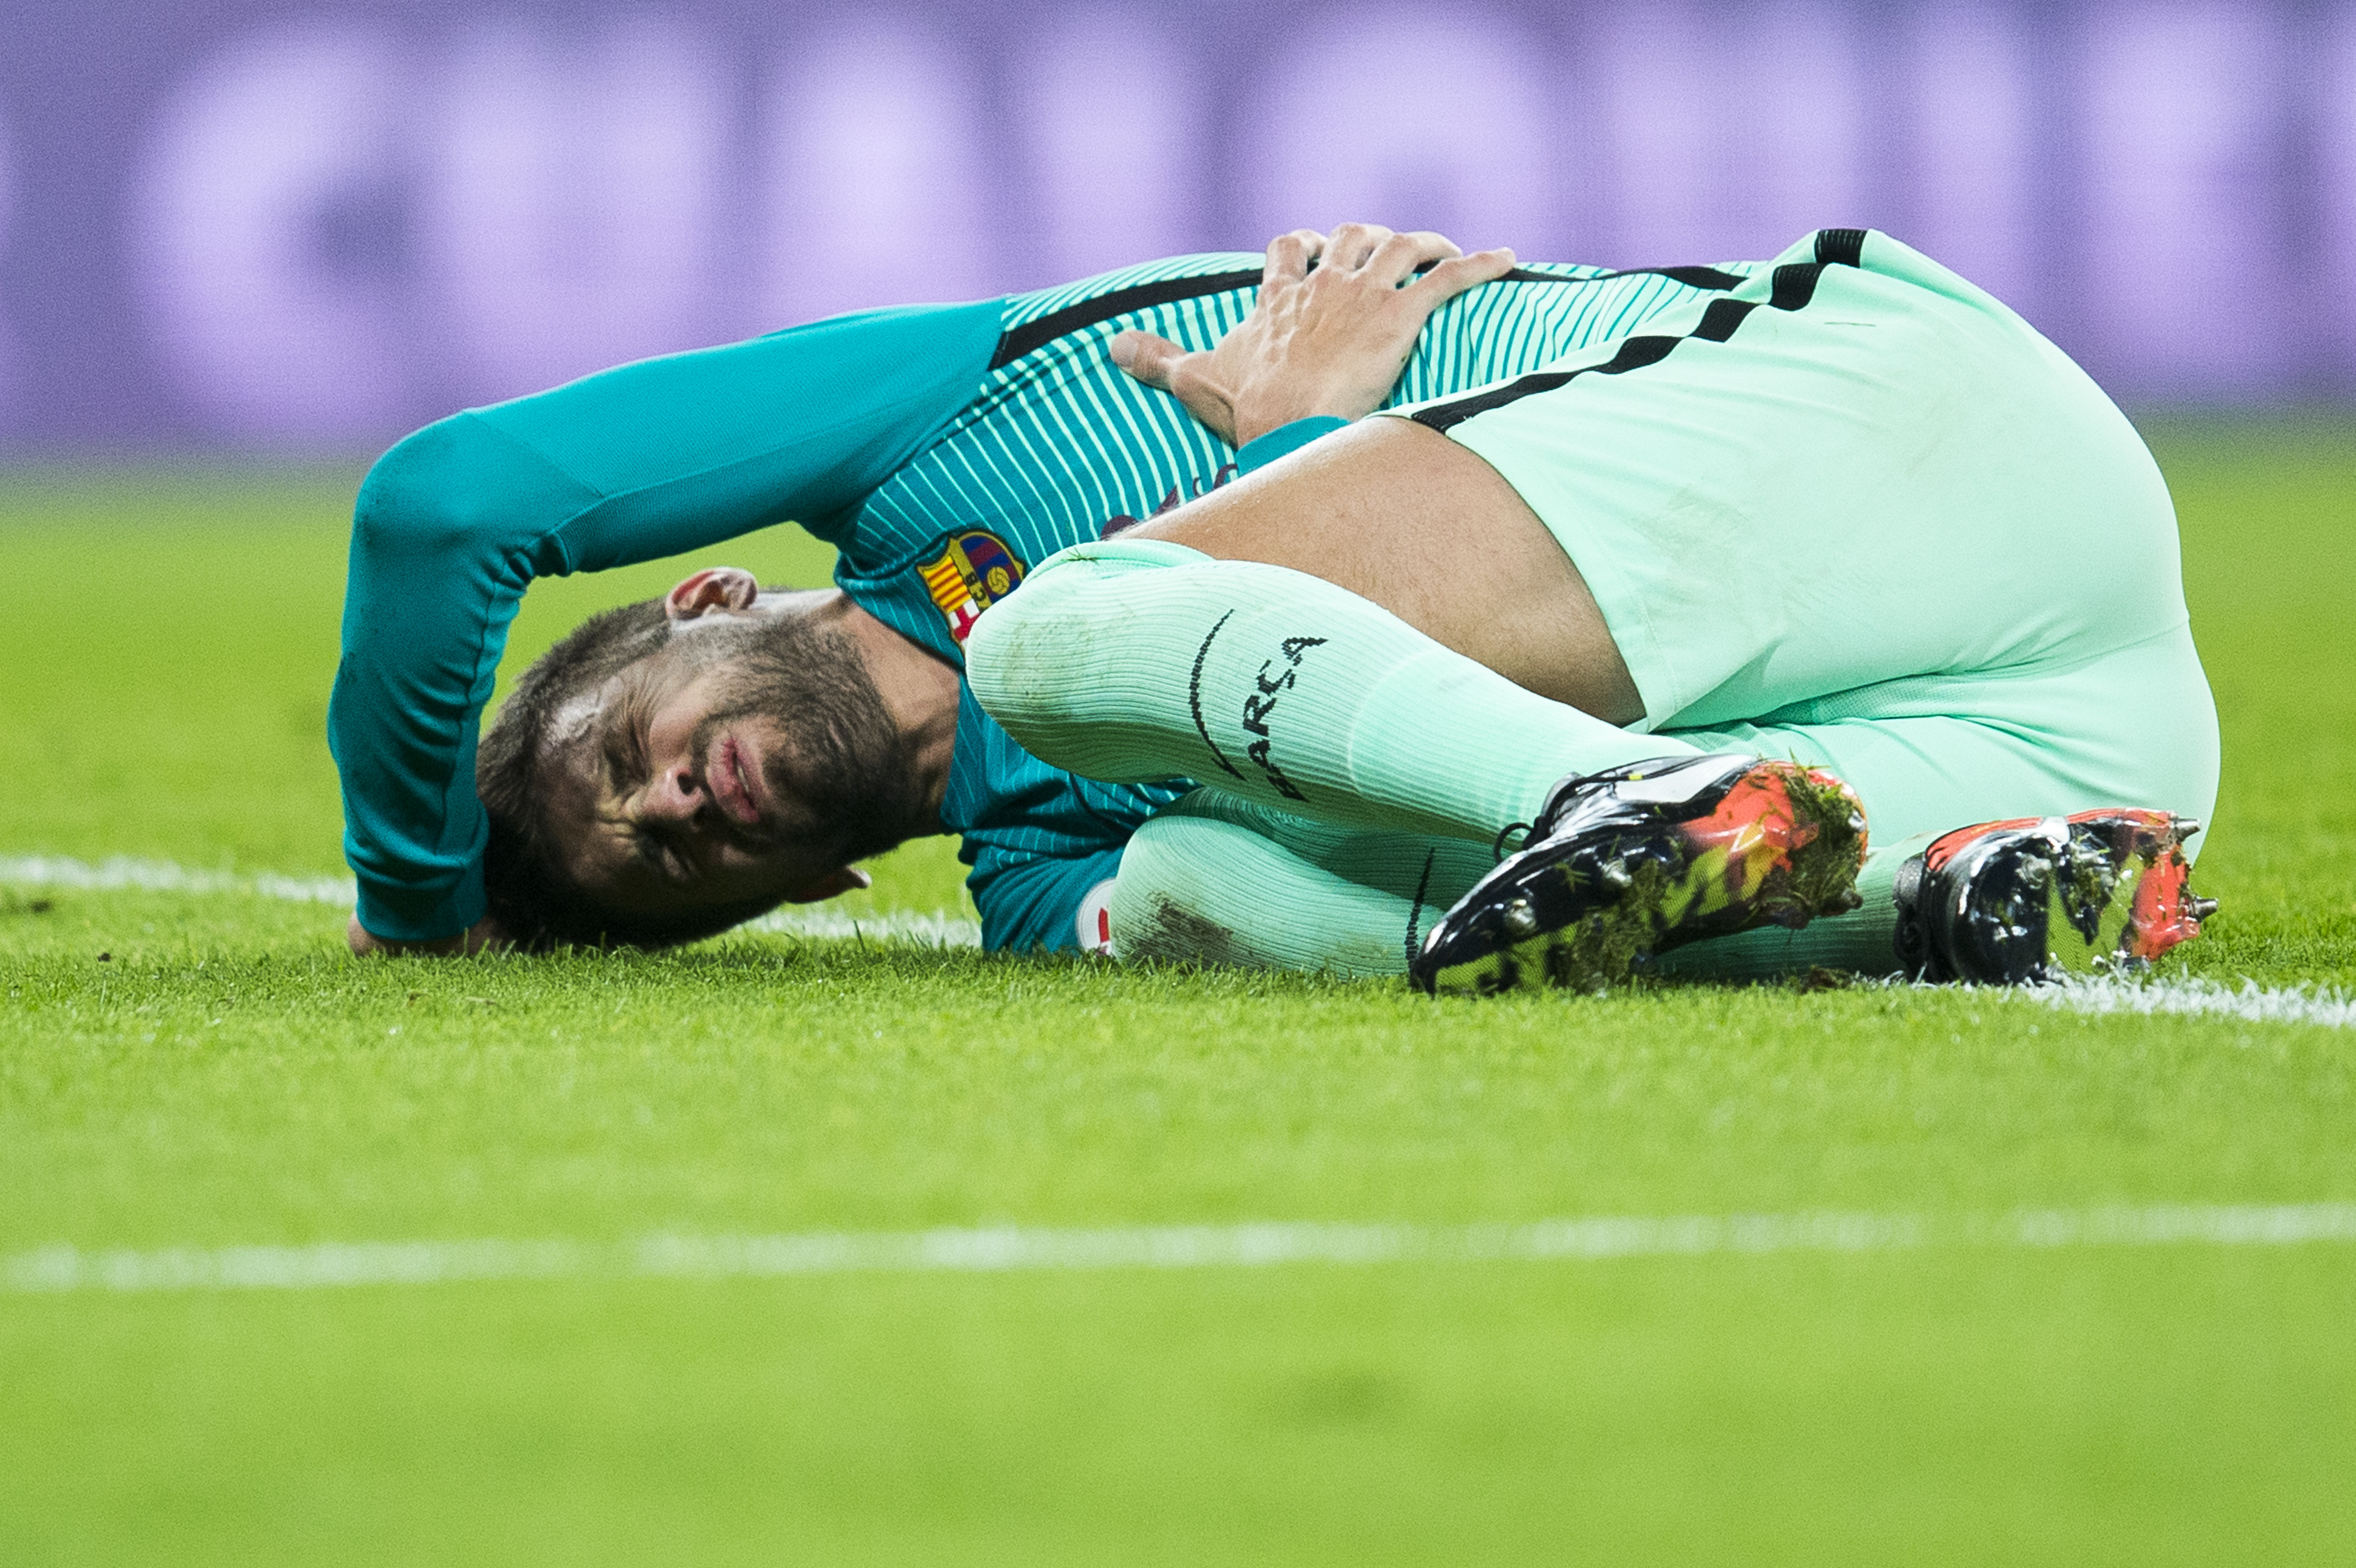 BILBAO, SPAIN - JANUARY 05: Gerard Pique of FC Barcelona reacts during the Copa del Rey Round of 16 first leg match between Athletic Club and FC Barcelona at San Mames Stadium on January 5, 2017 in Bilbao, Spain.  (Photo by Juan Manuel Serrano Arce/Getty Images)